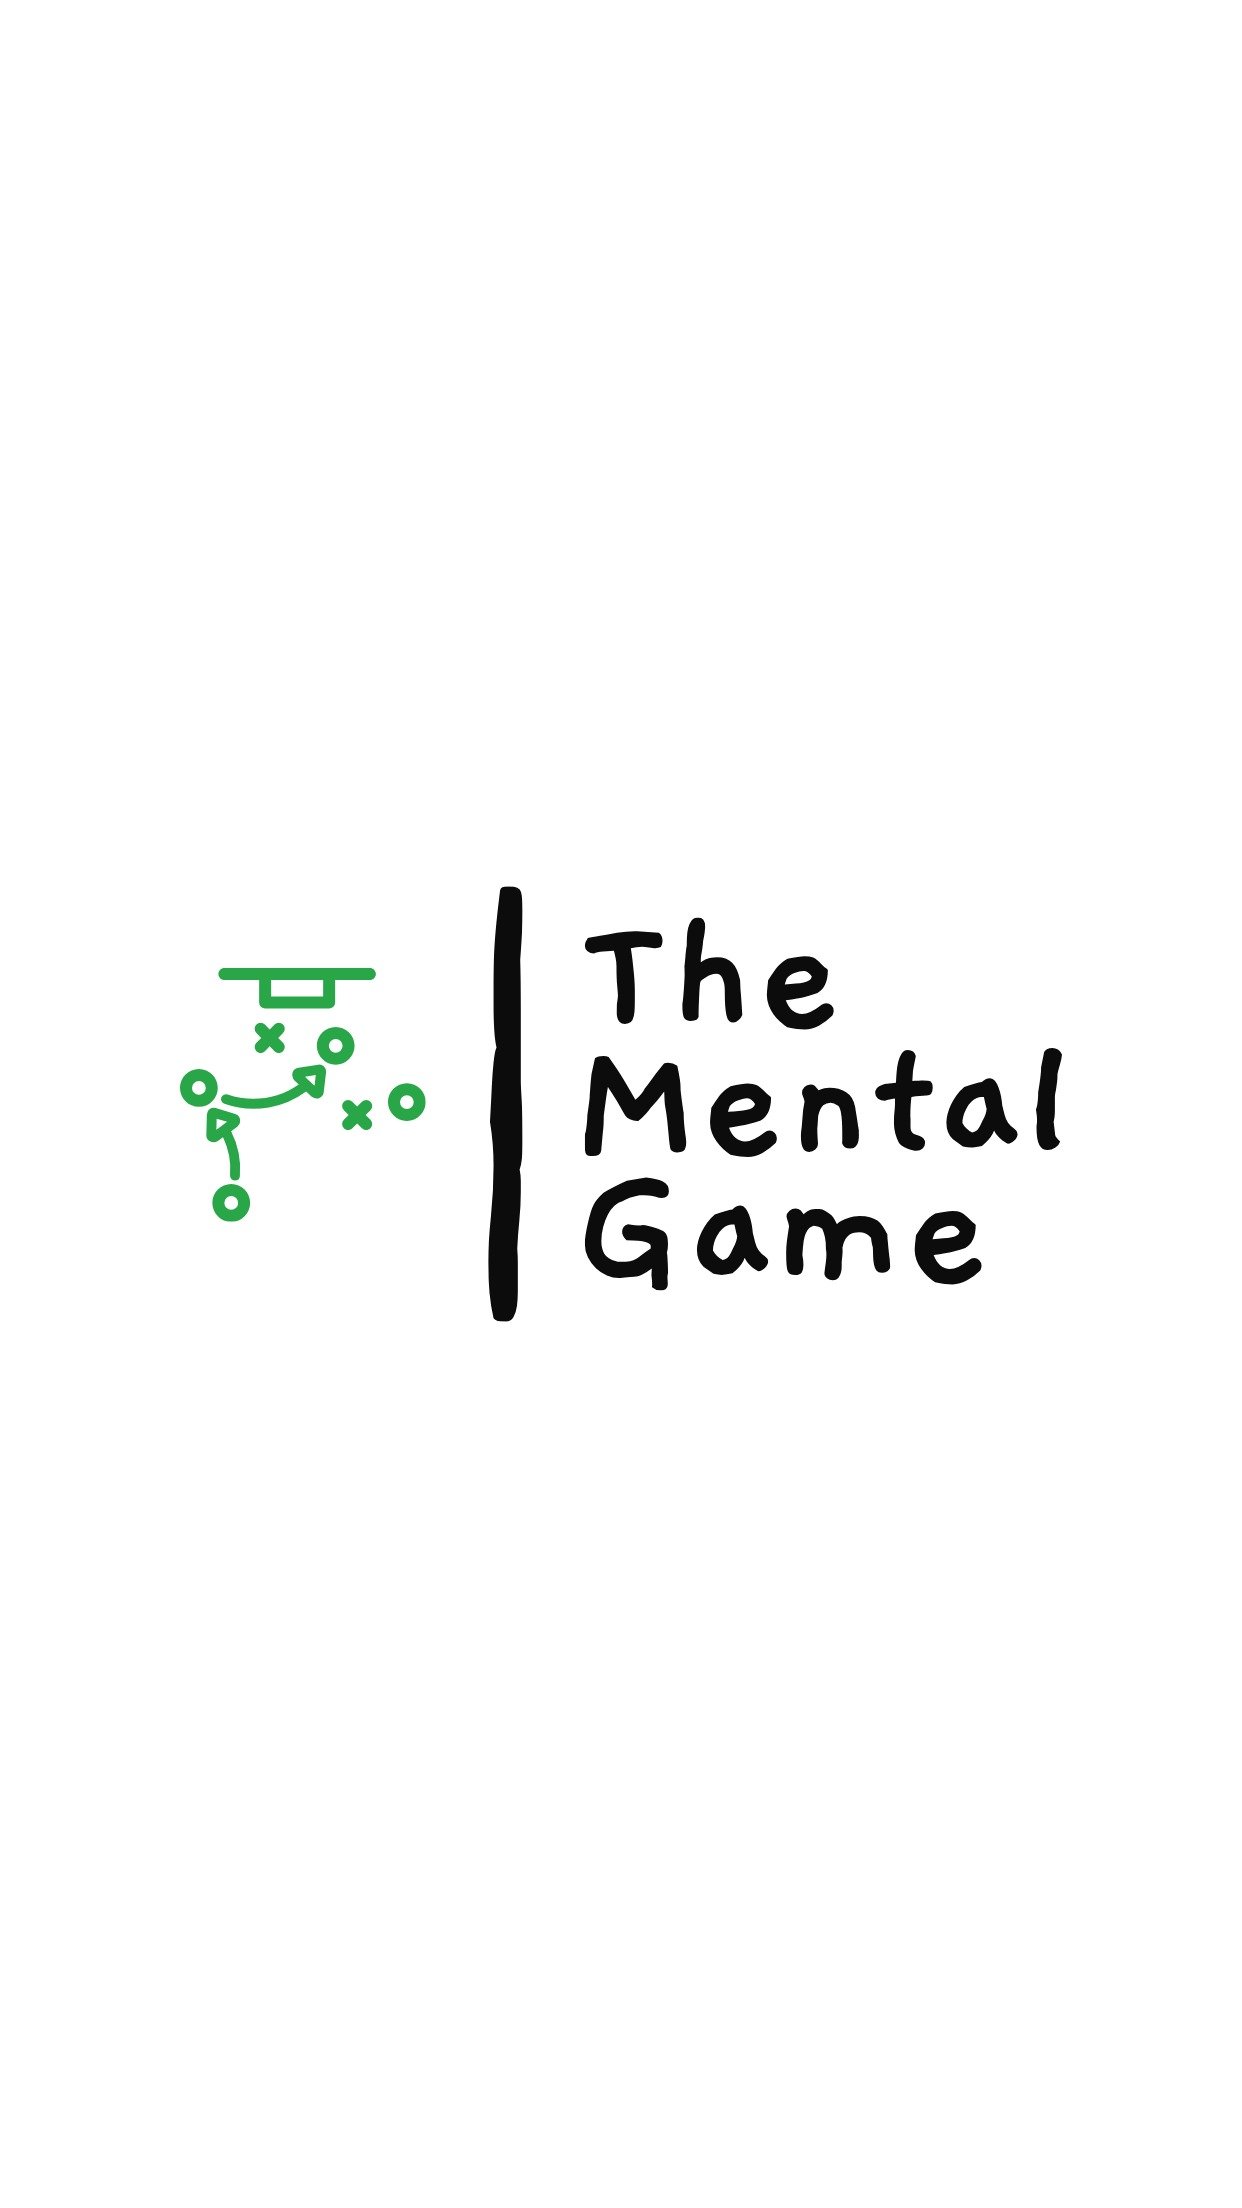 The Mental Game